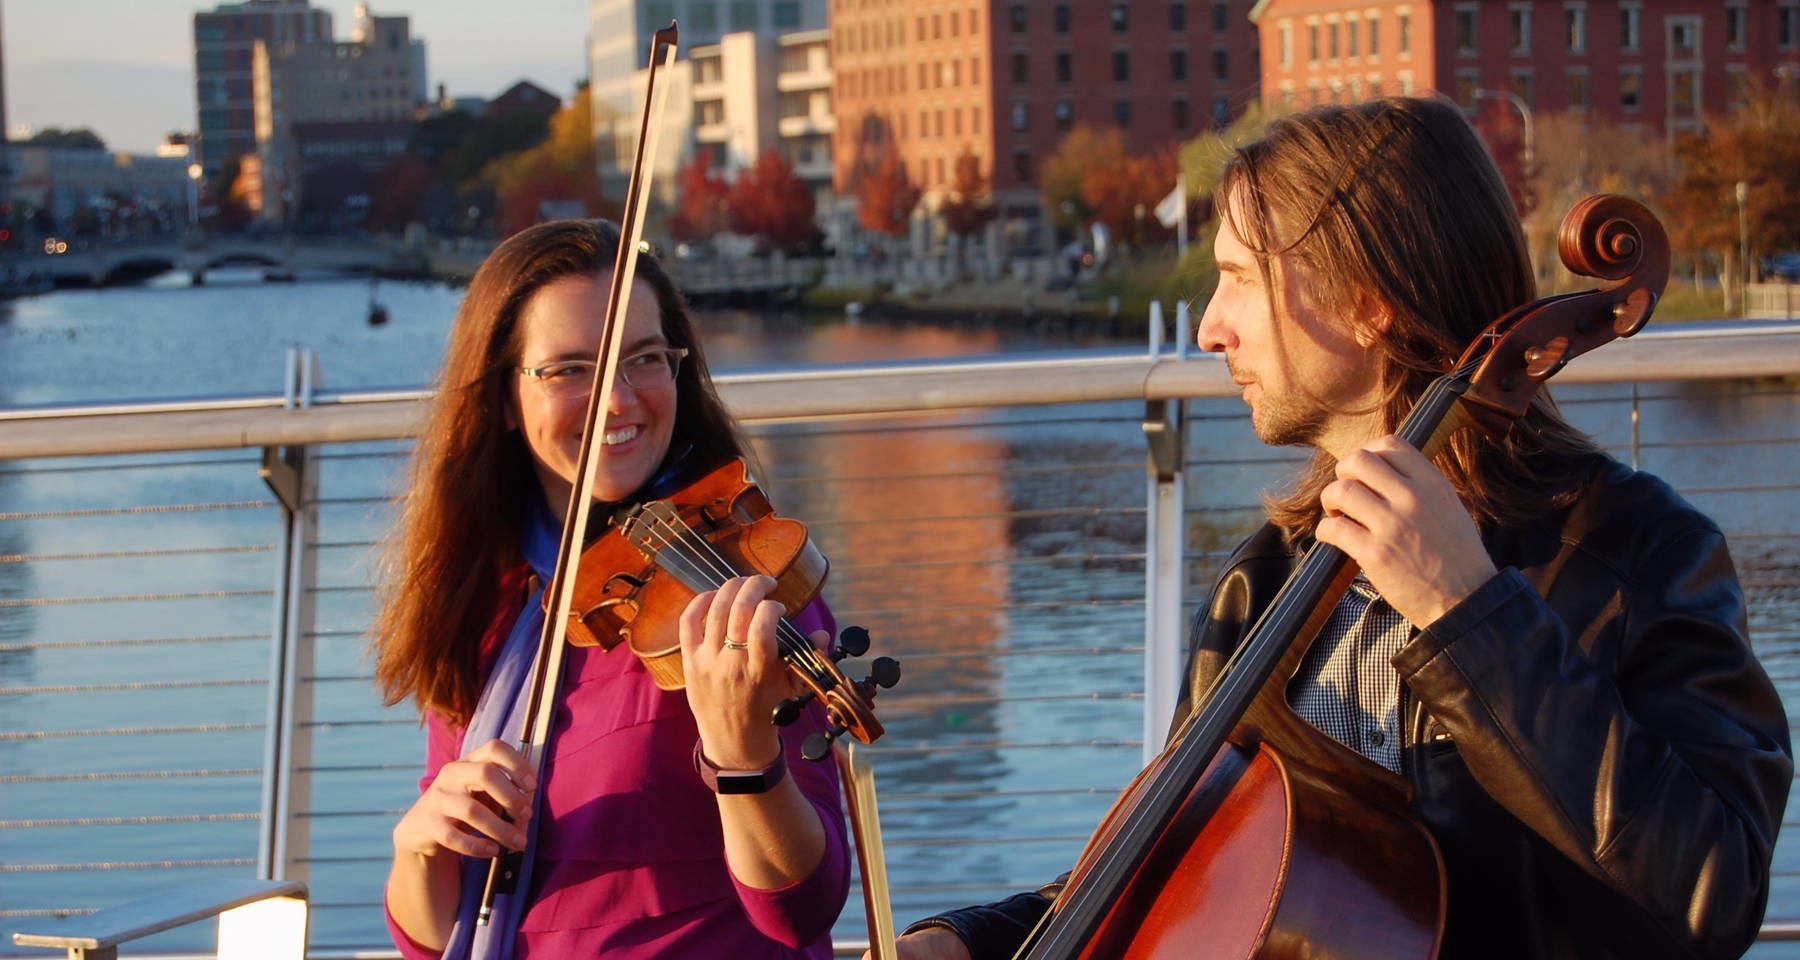 From Classical to Folk and Beyond: Peter on cello and EmmaLee on violin